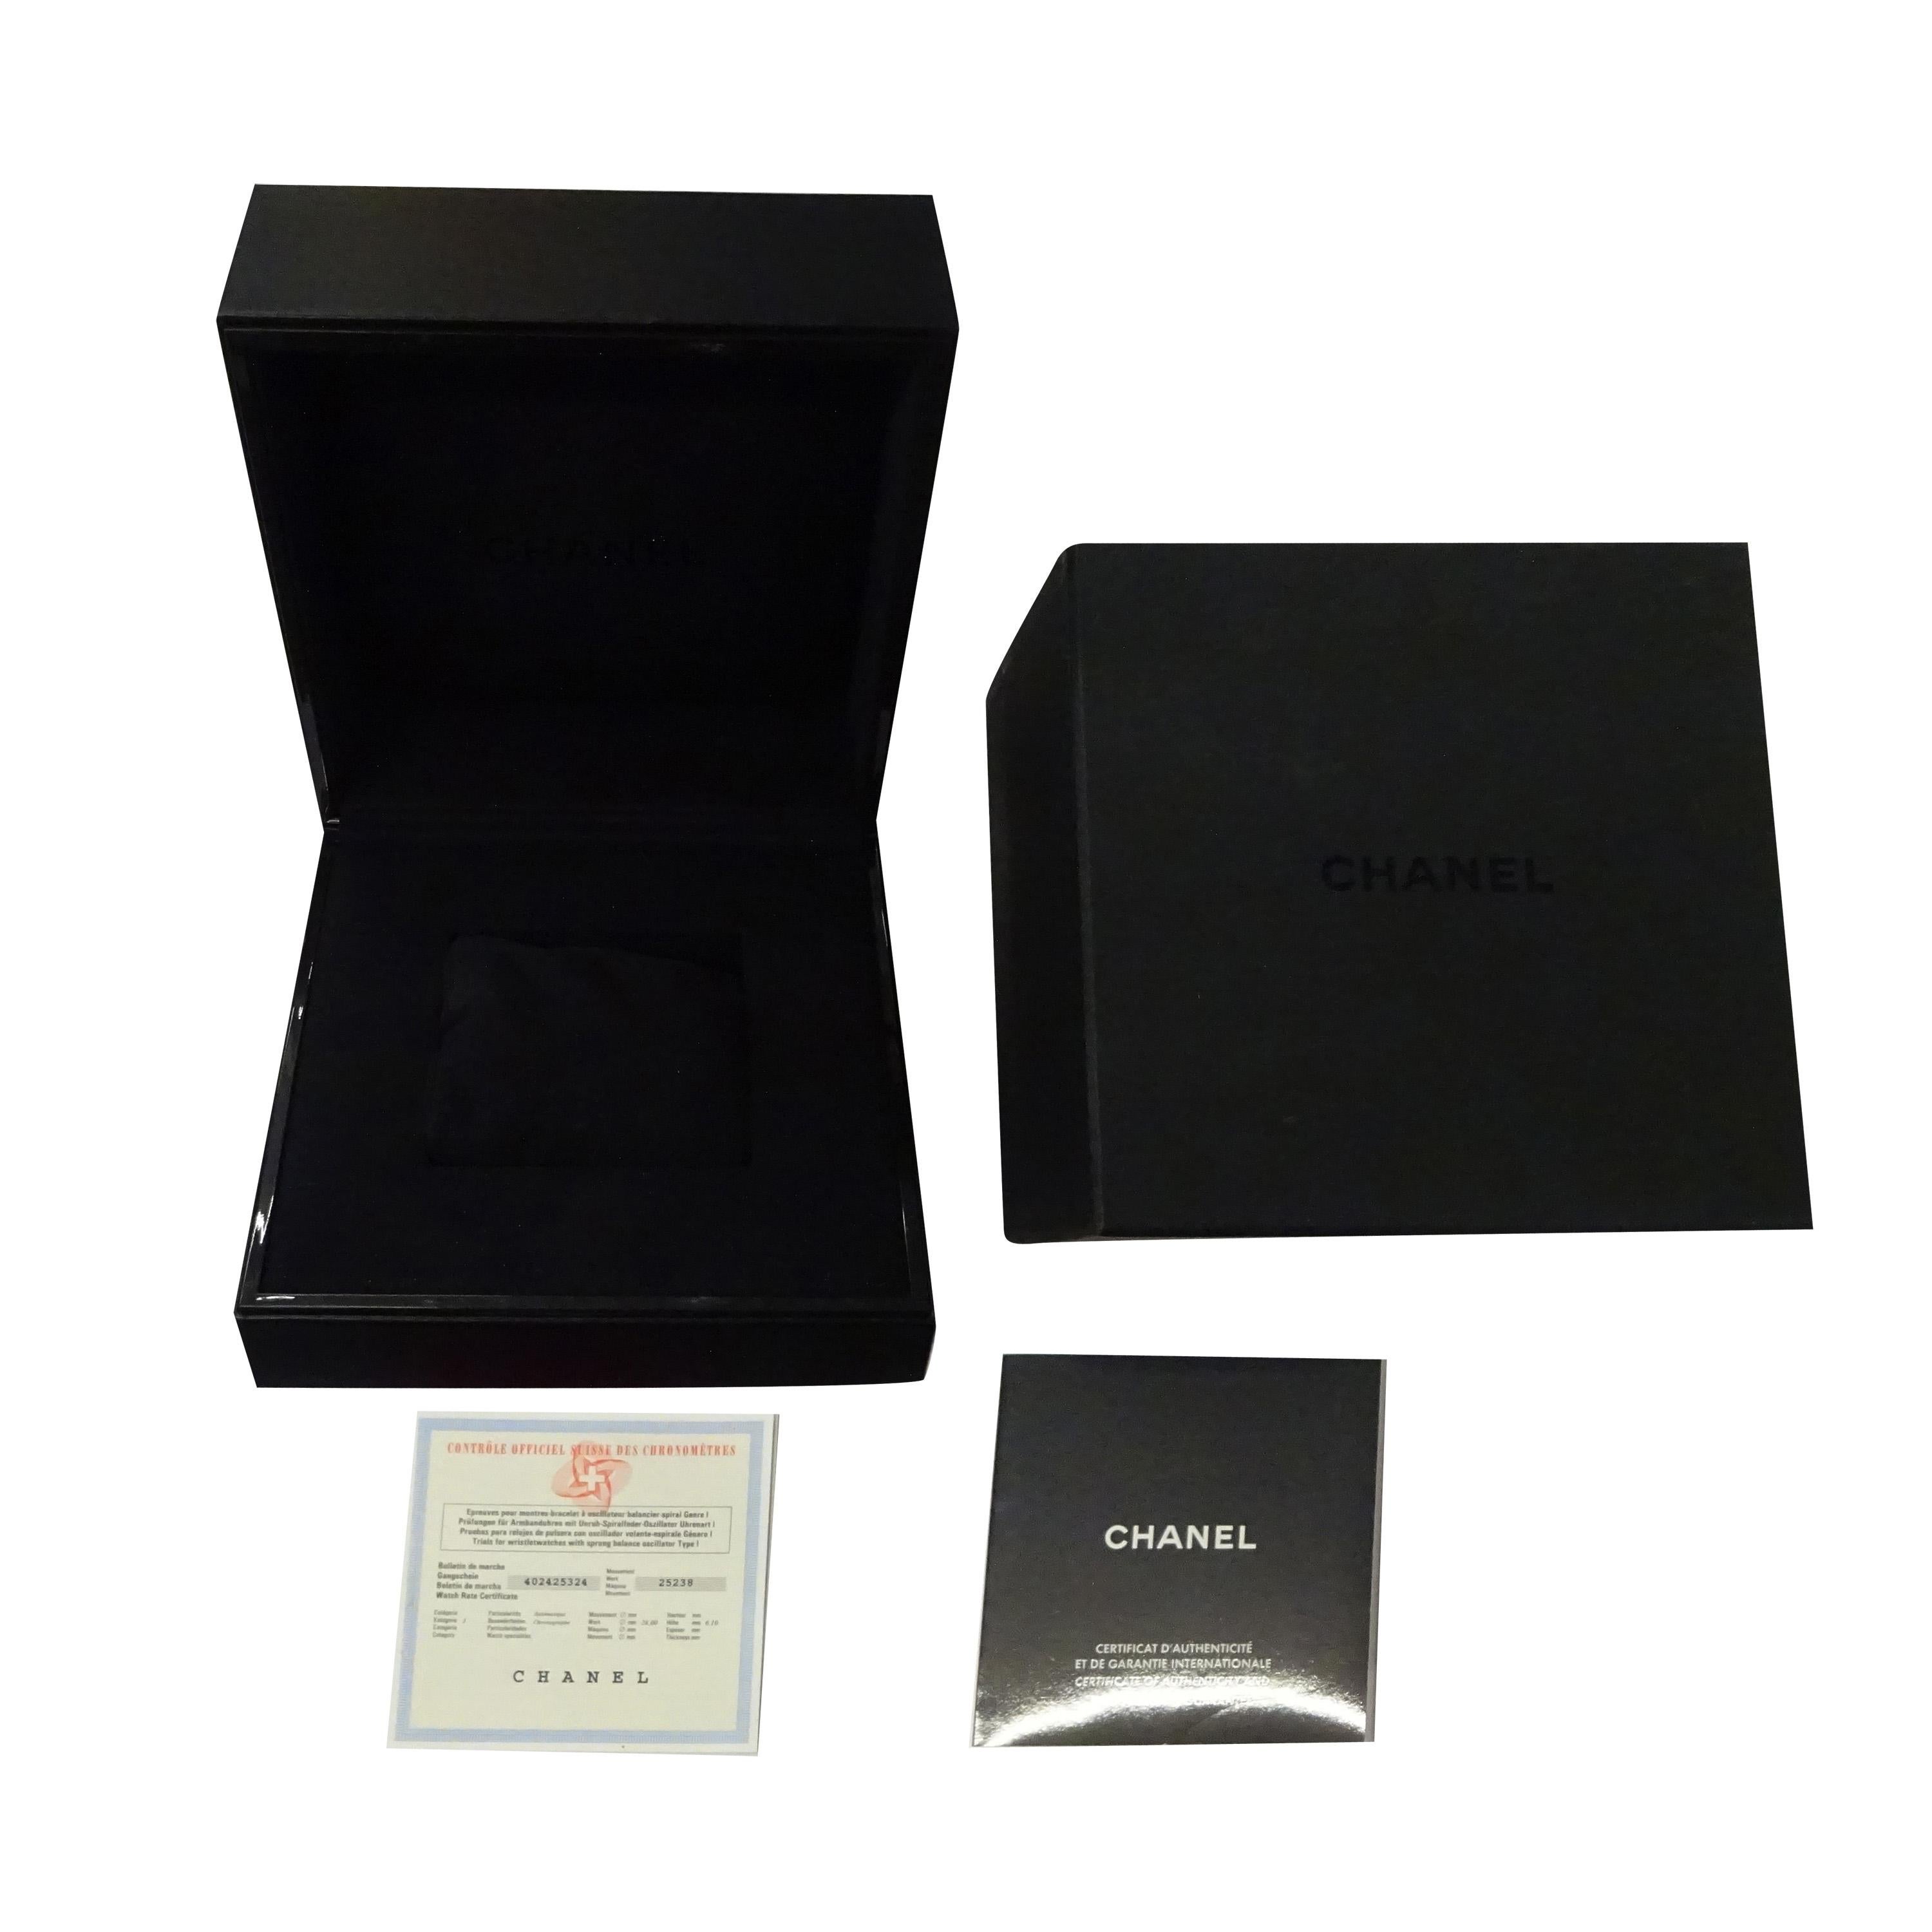 Chanel J12 H1707 Unisex Watch in Stainless Steel/Ceramic 2